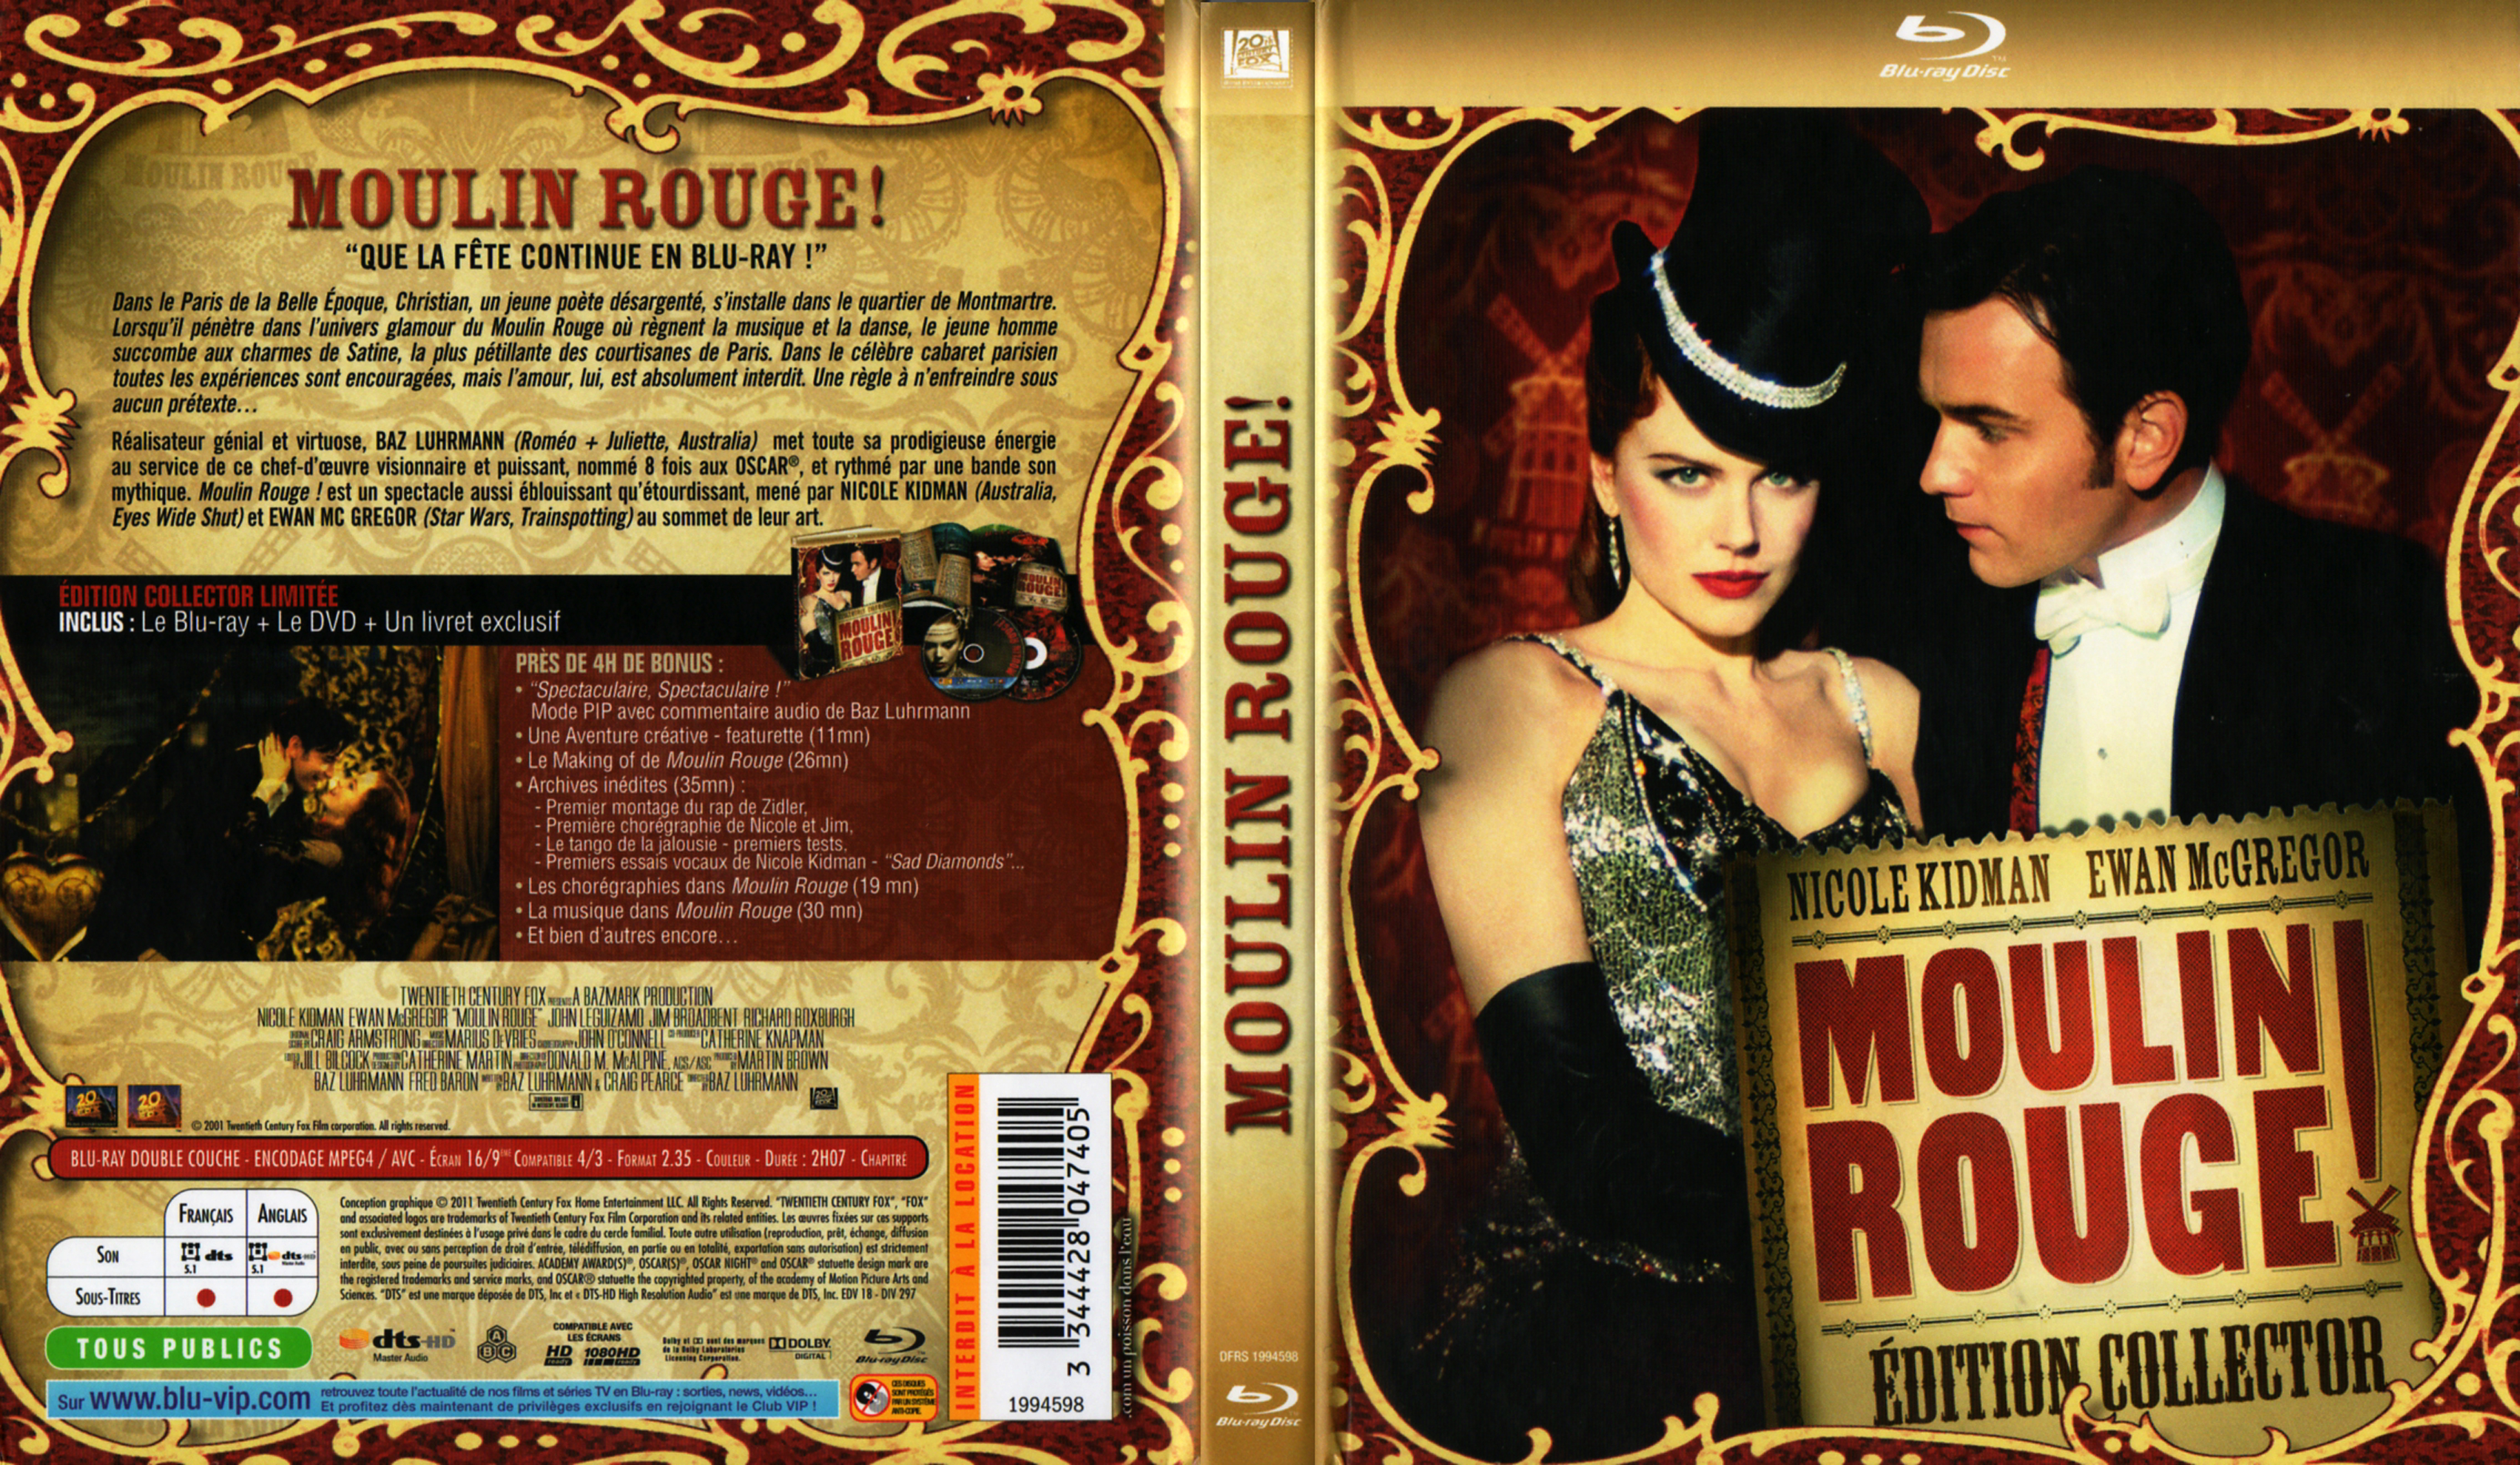 Jaquette DVD Moulin rouge (BLU-RAY) v2